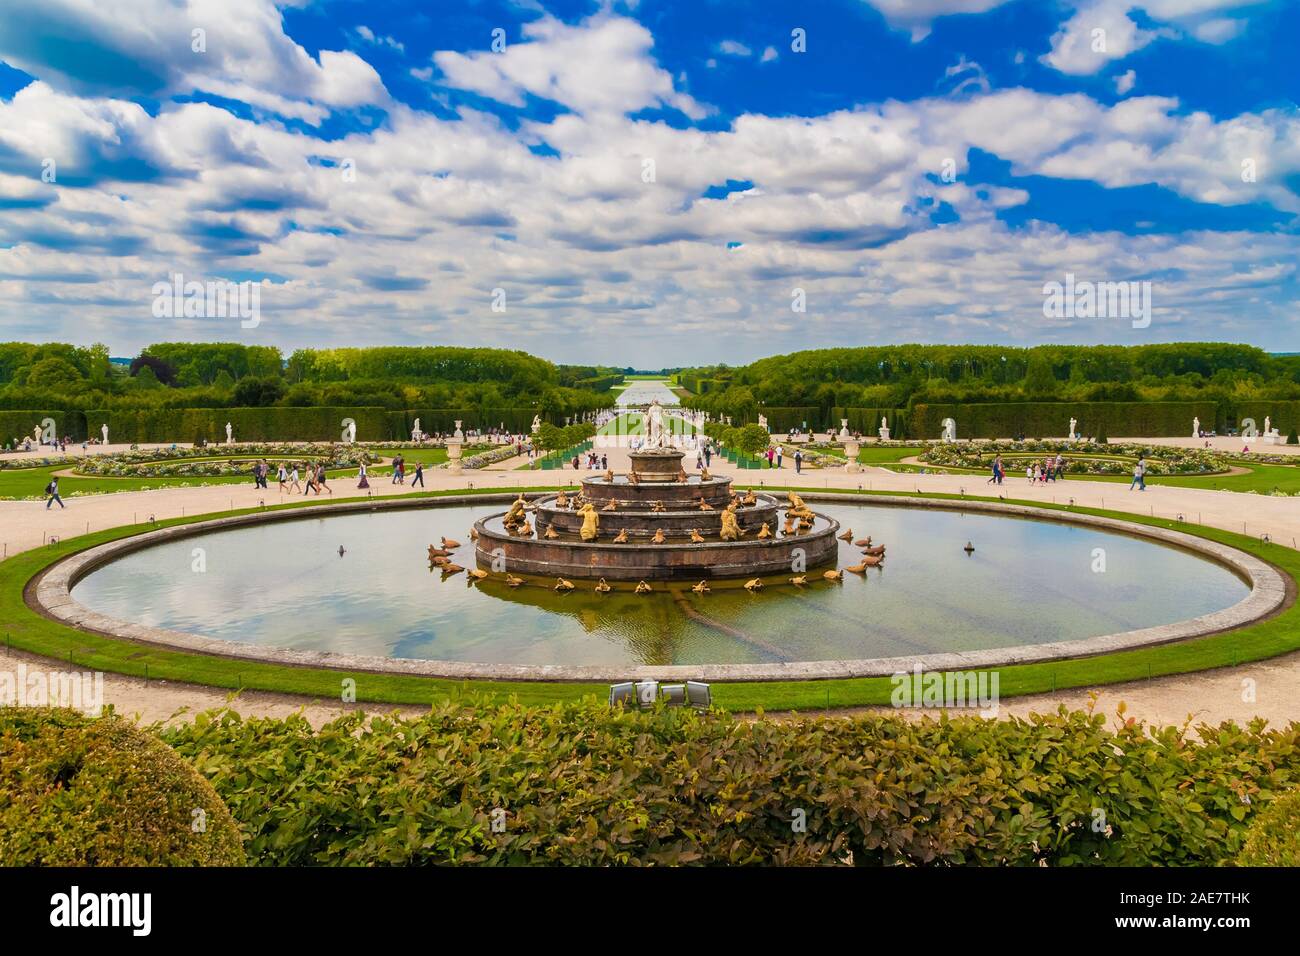 Great panoramic landscape view of the Latona Fountain (Bassin de Latone) in the Gardens of Versailles with the Grand Canal in the background on a nice... Stock Photo